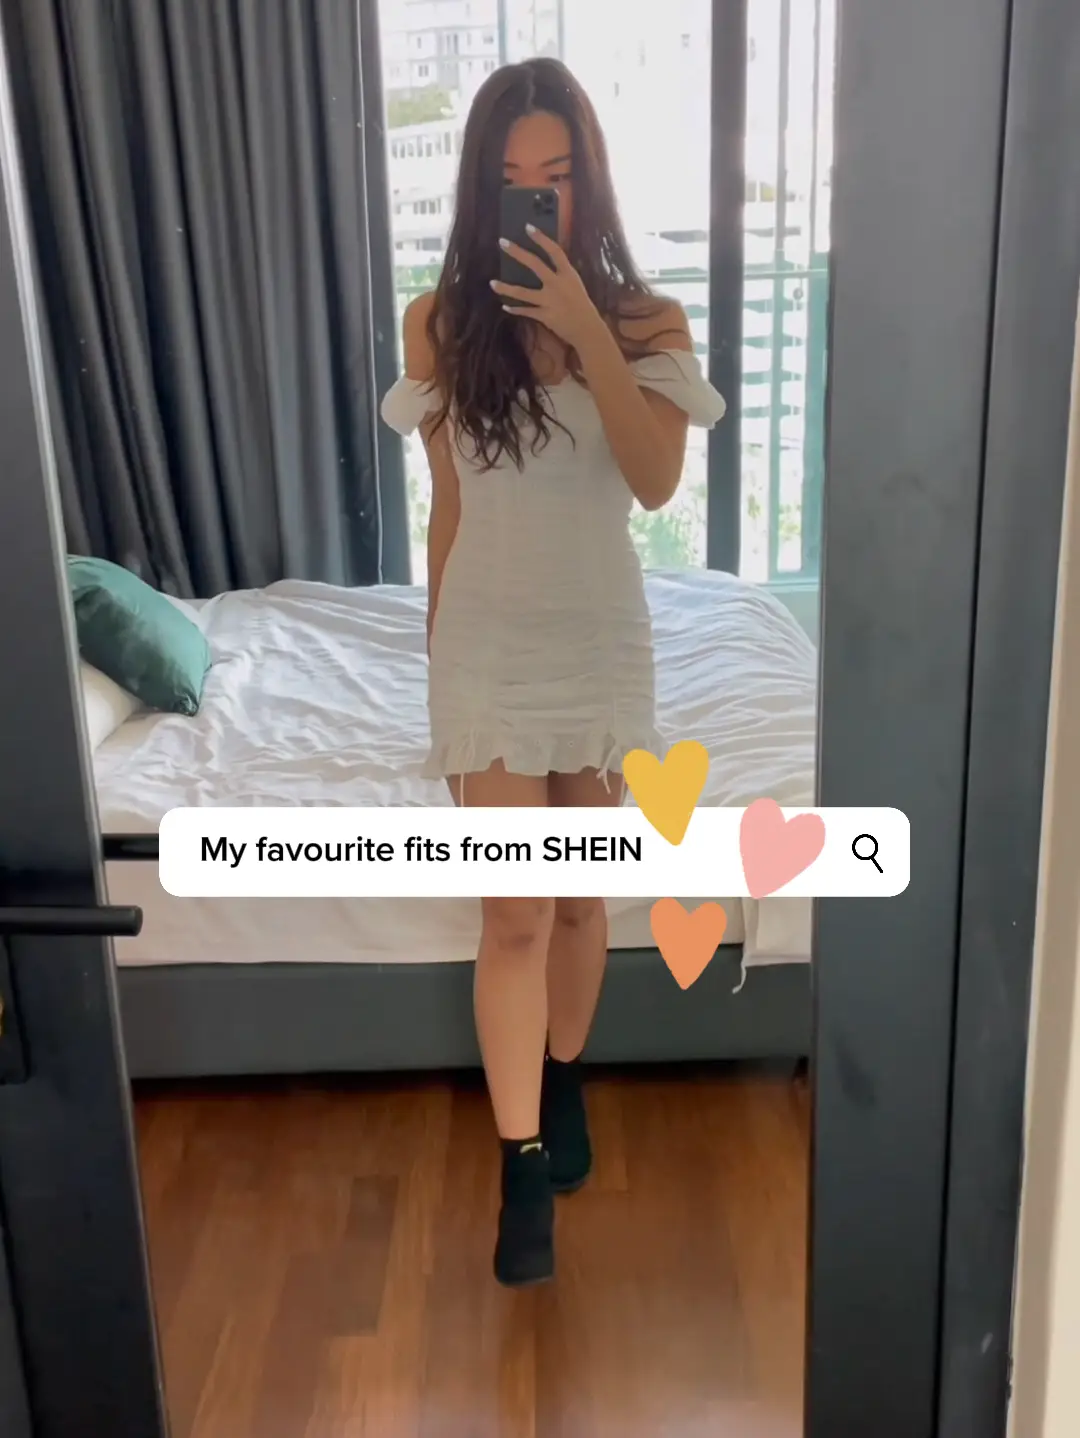 I've found the perfect dress from Shein - it was only £8 and is